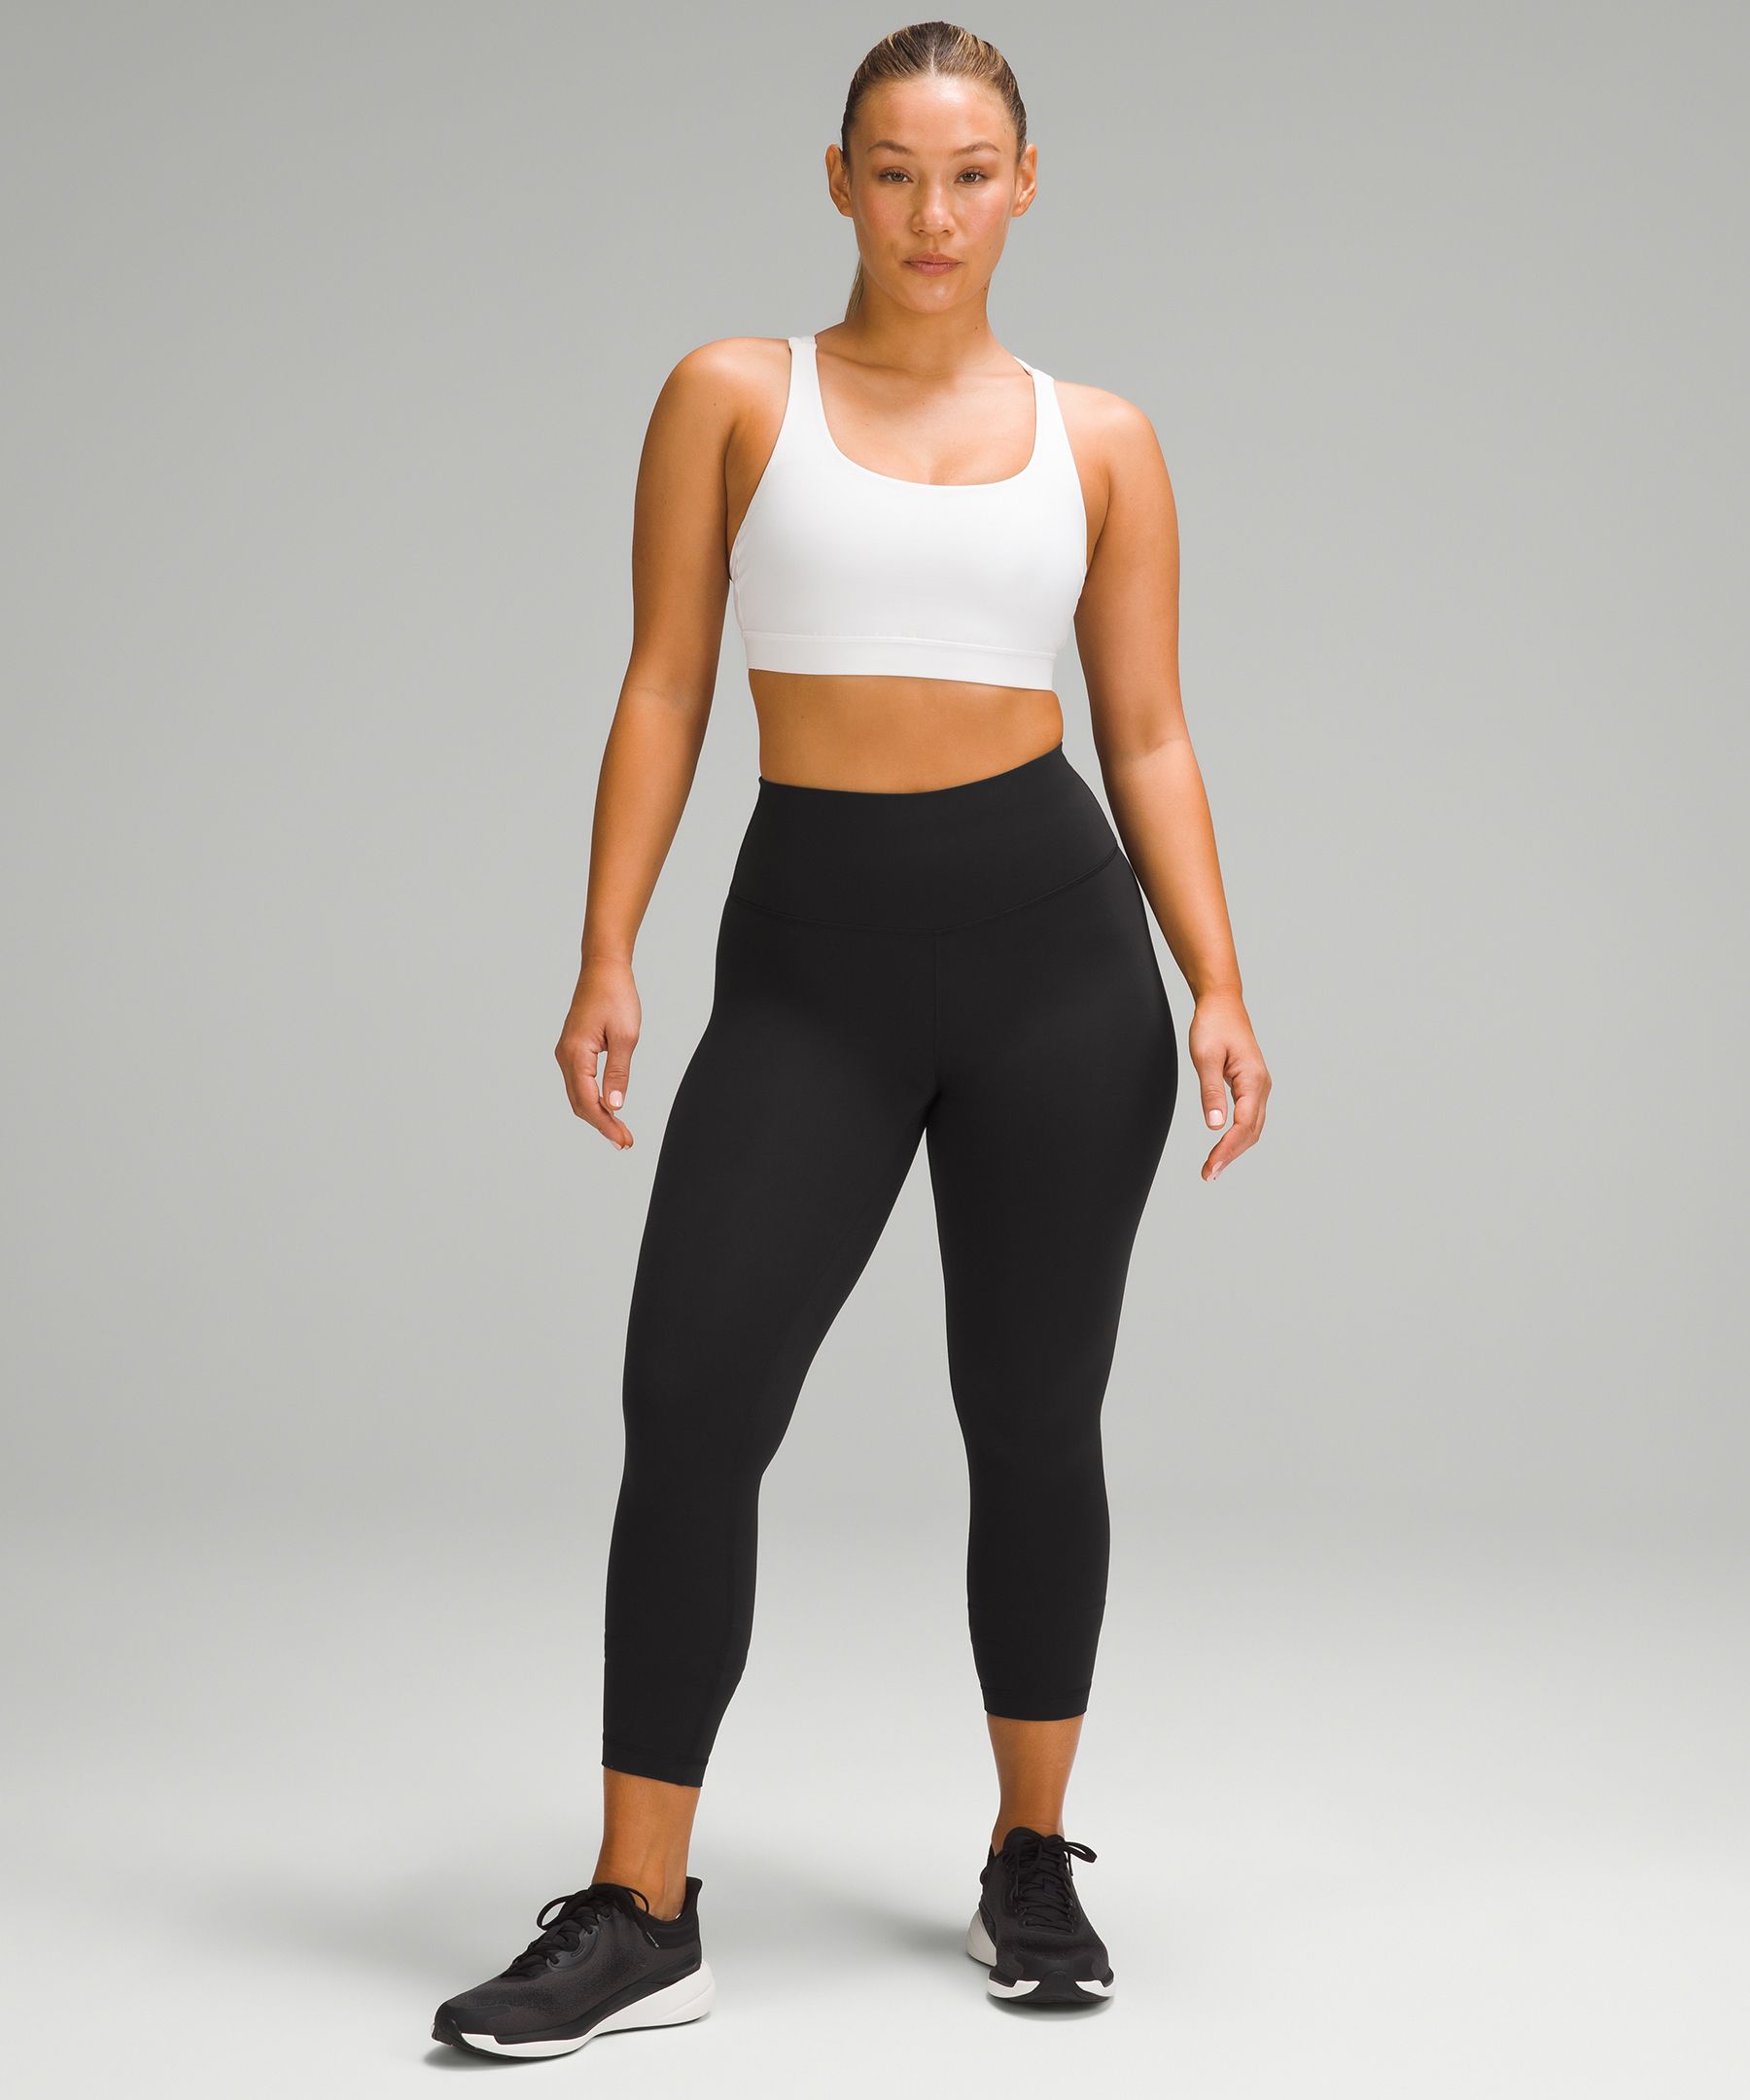 Fabletics Seeks to Continue Momentum as Some in Activewear Contract